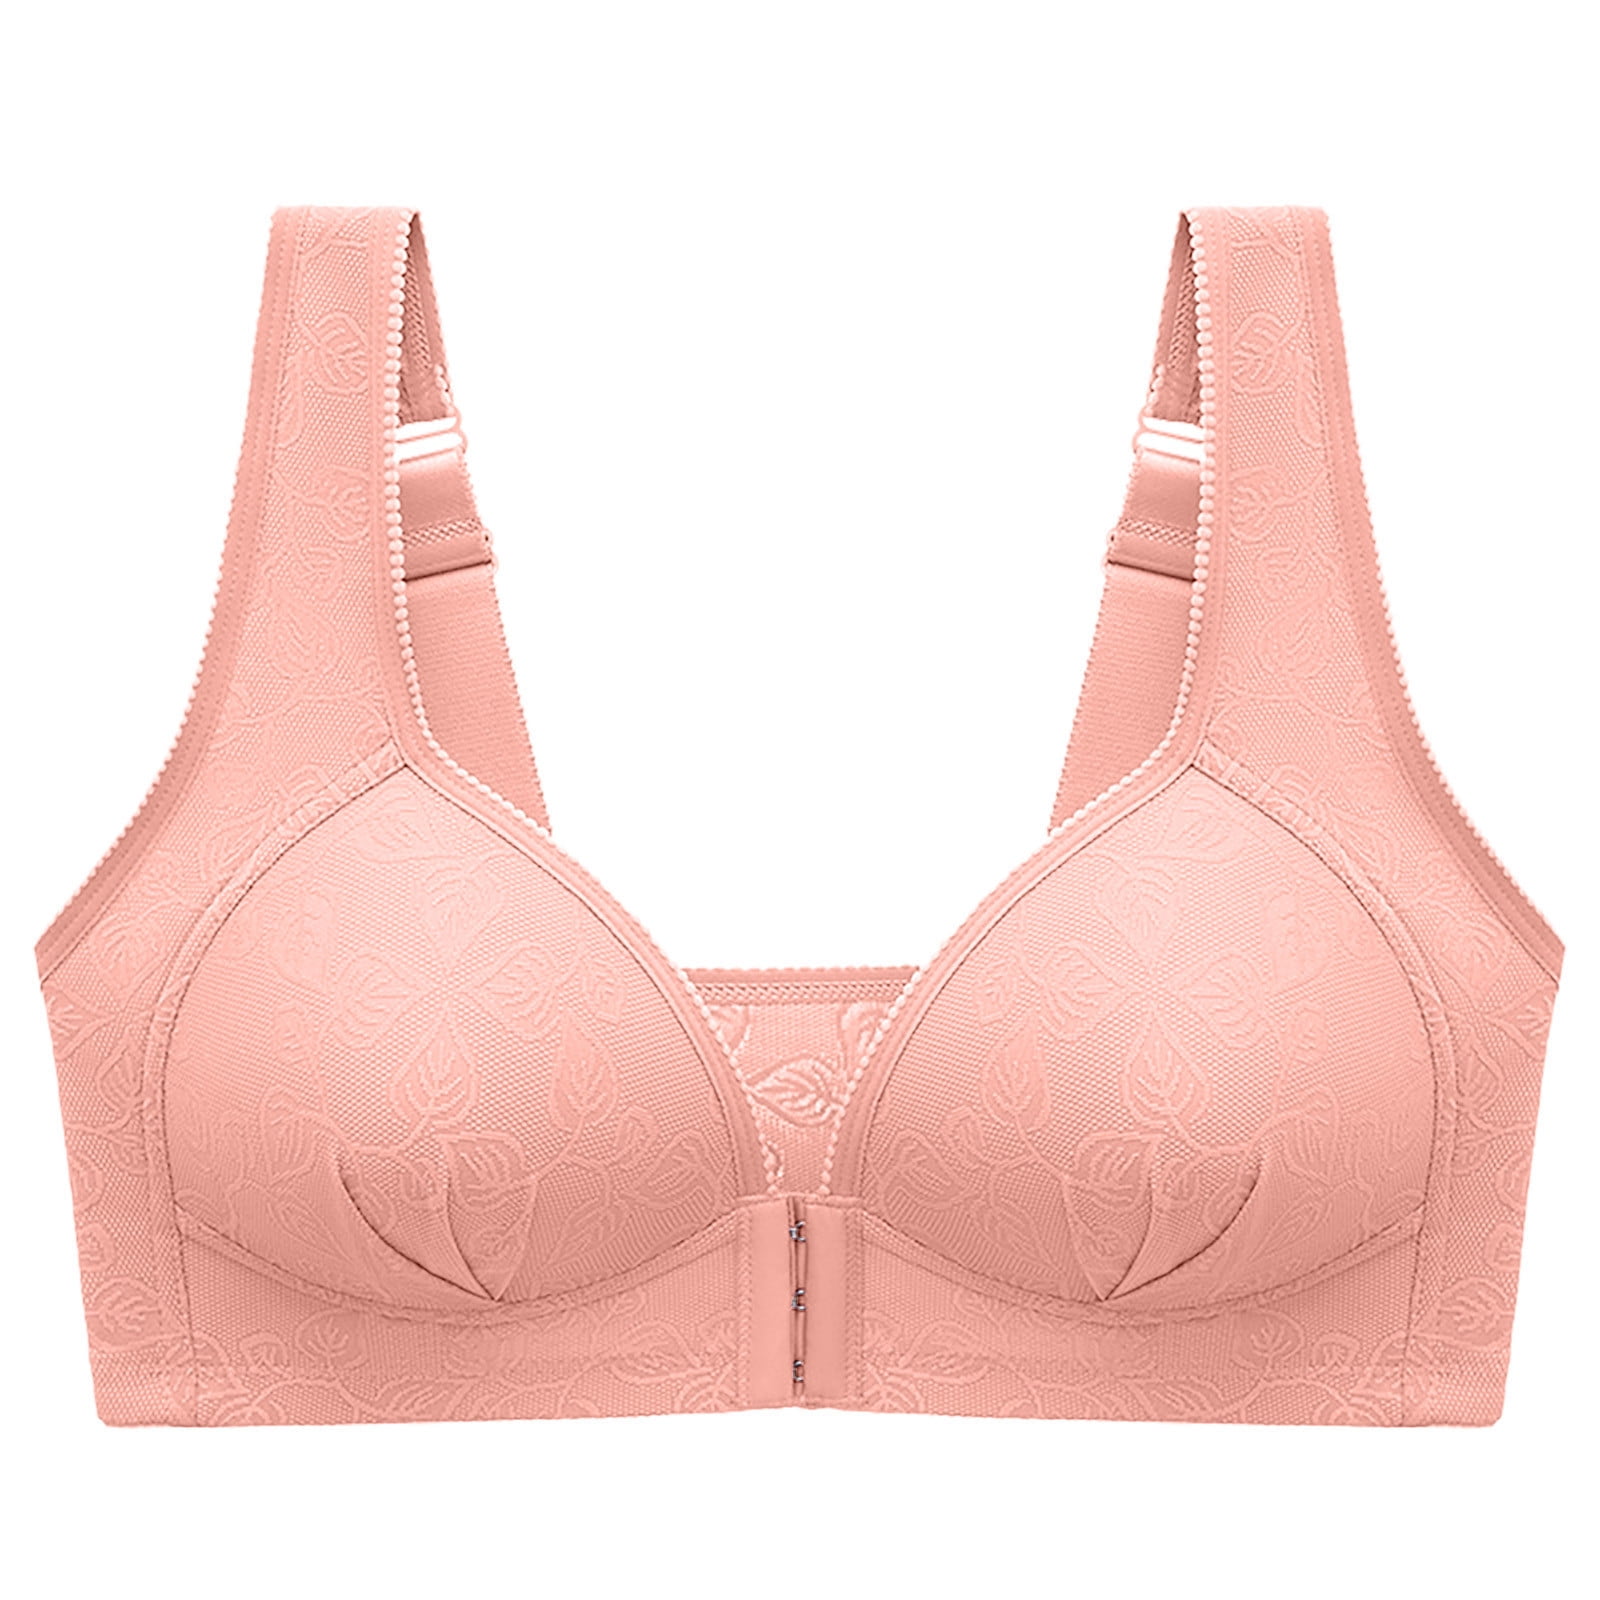 Hfyihgf On Clearance Front Closure Wire-Free Bras for Women Lace Comfort  Push Up Bra Full-Coverage Wireless Brassiere Breathable Bralettes Lingerie